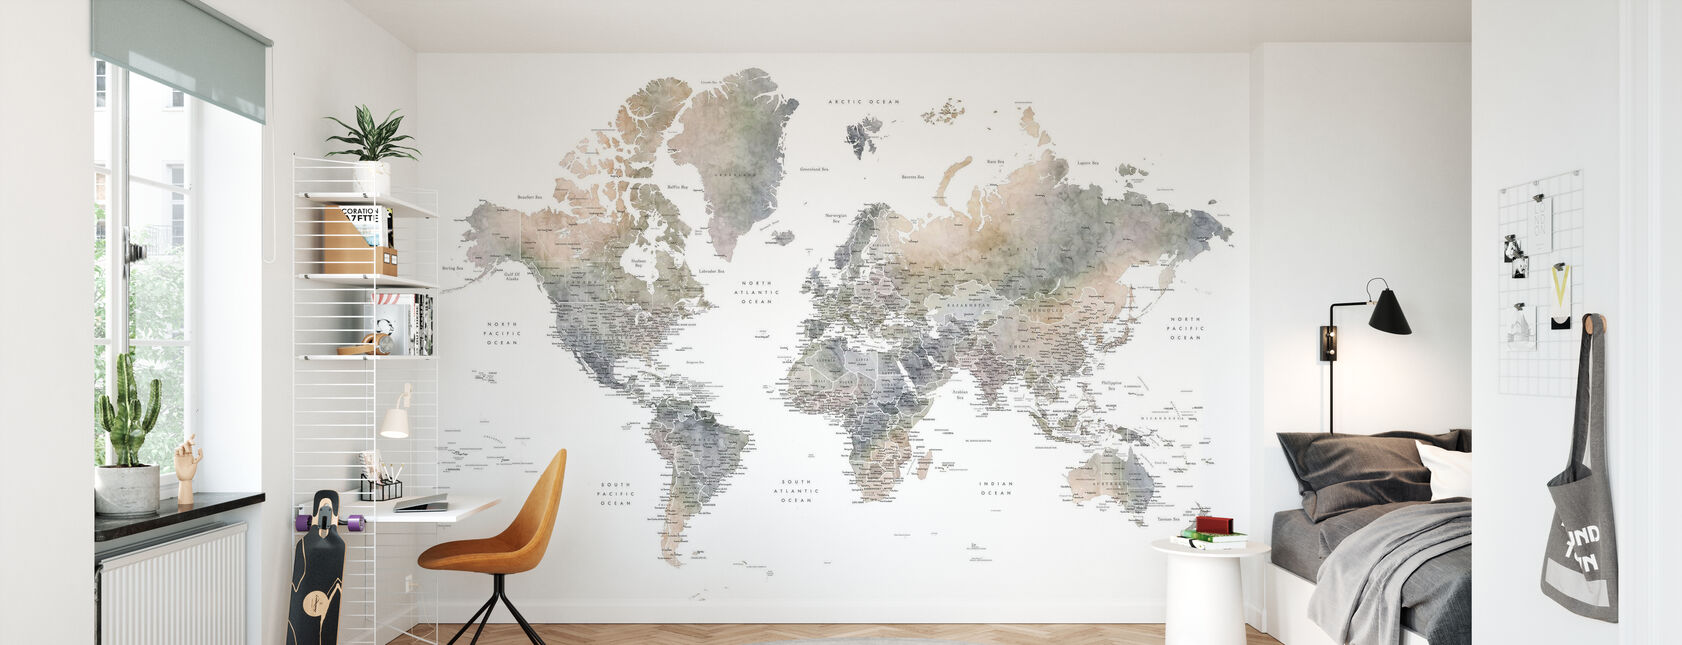 World Map with Cities - Wallpaper - Kids Room